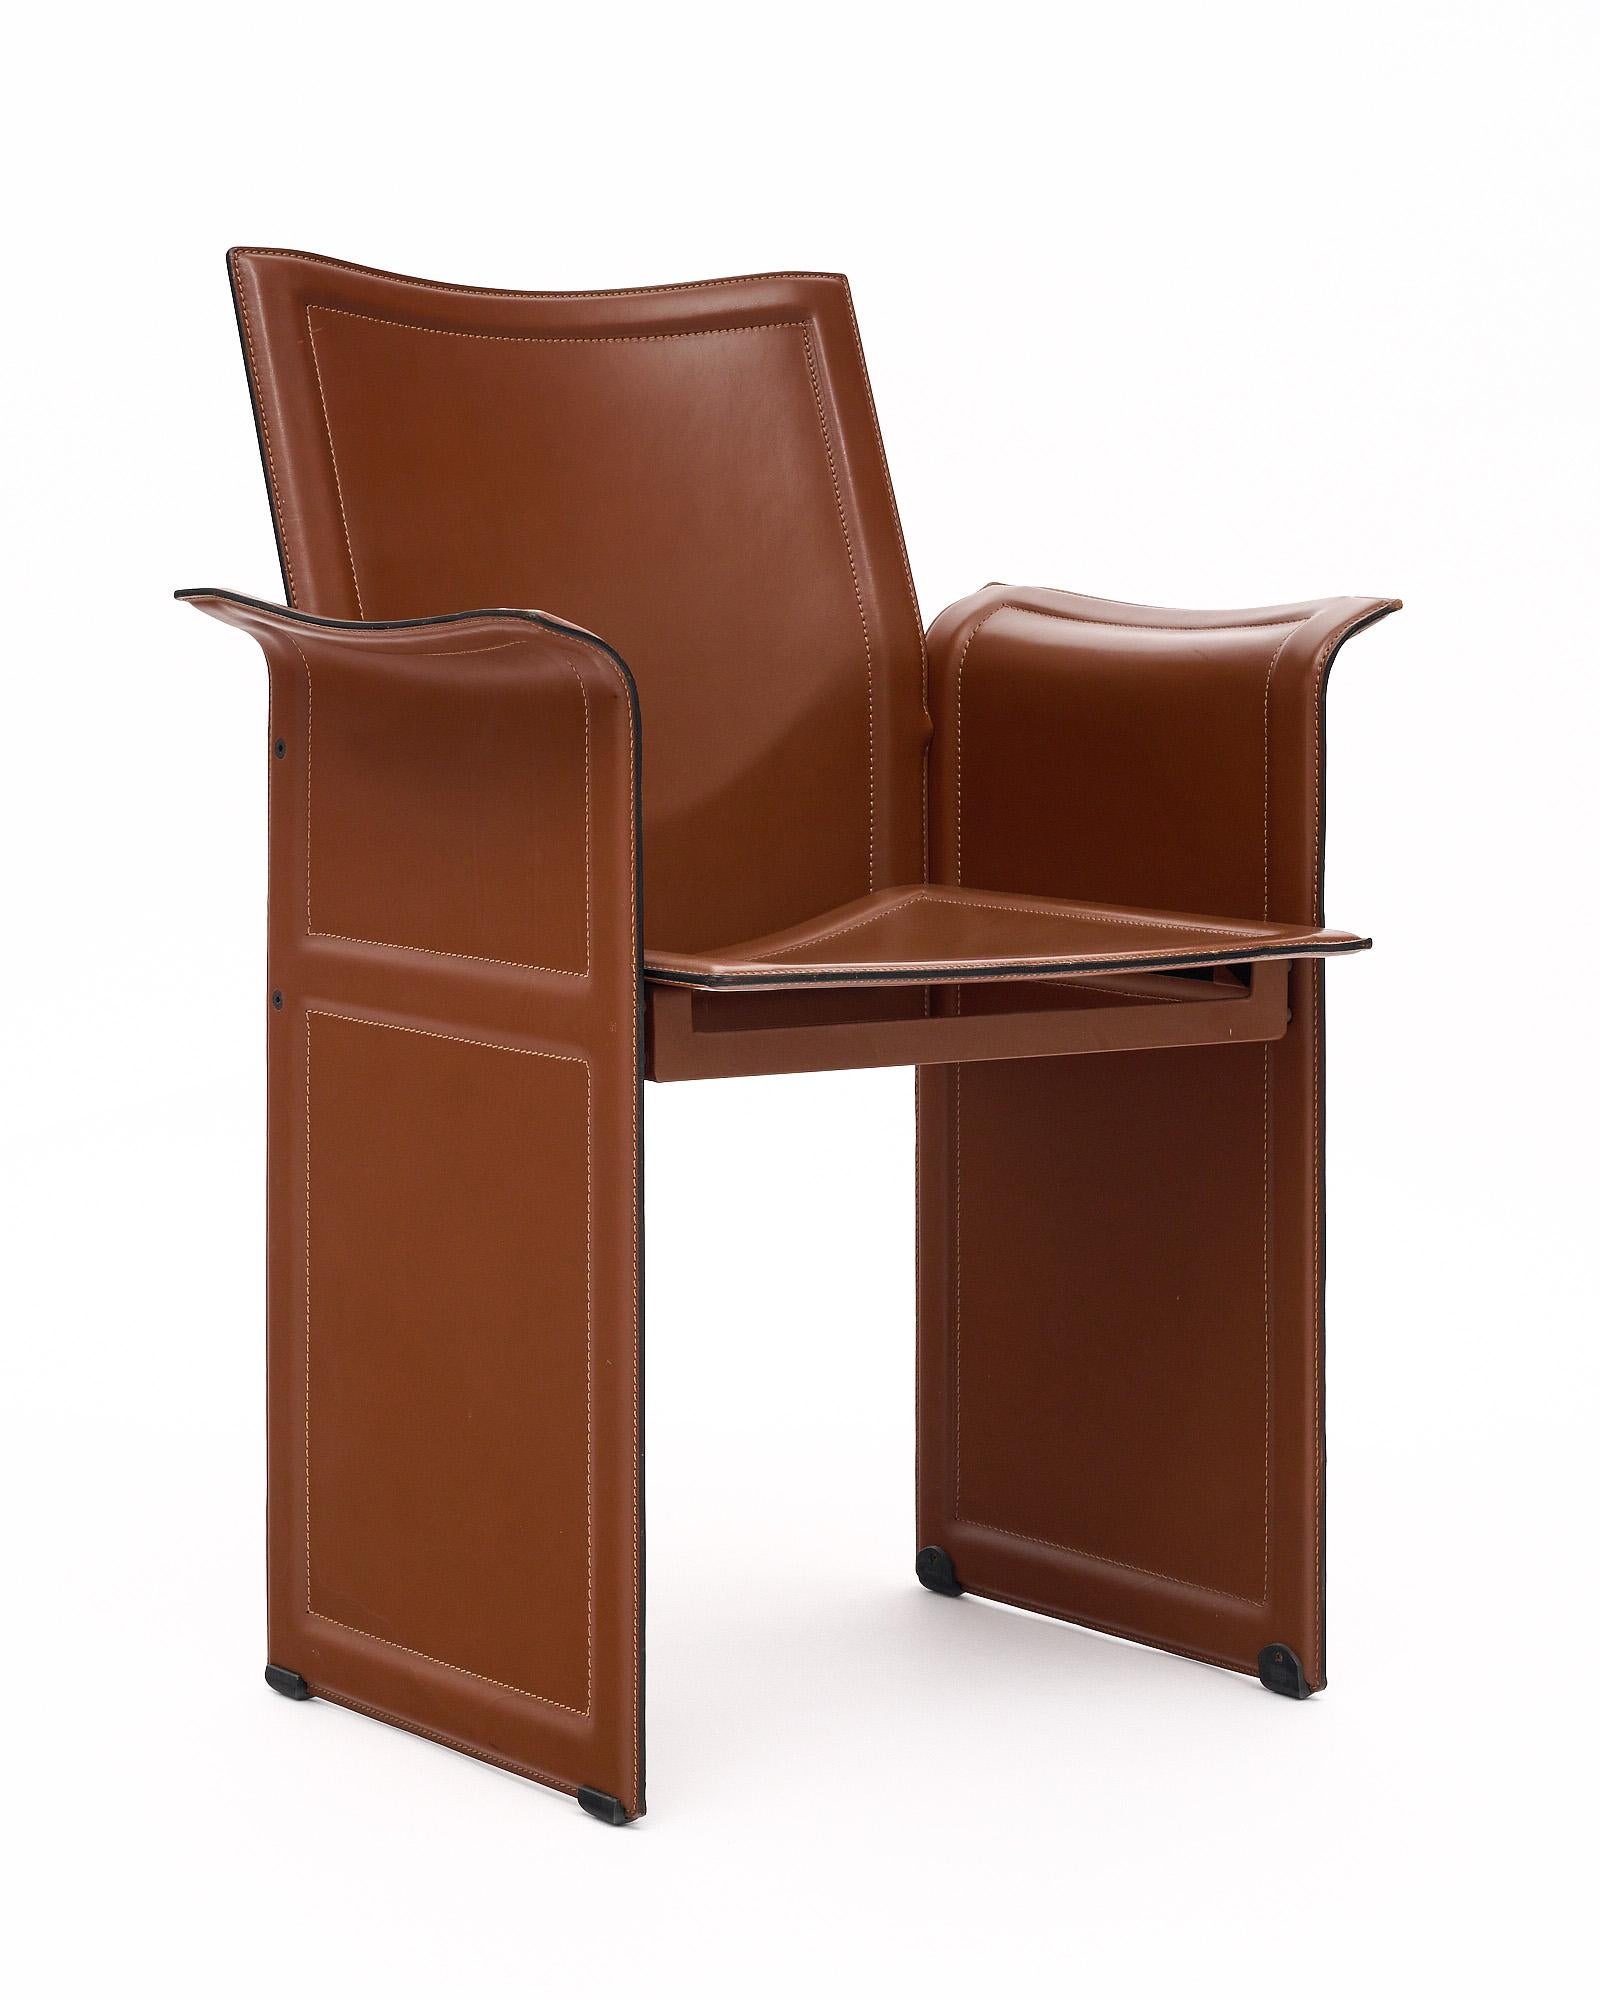 Set of 10 Modern brown leather vintage dining armchairs by Tito Agnoli for Matteo Grassi. They are made with metal frames and completely covered in a stitched brown leather in exceptional condition. This large set has superb stitching throughout and